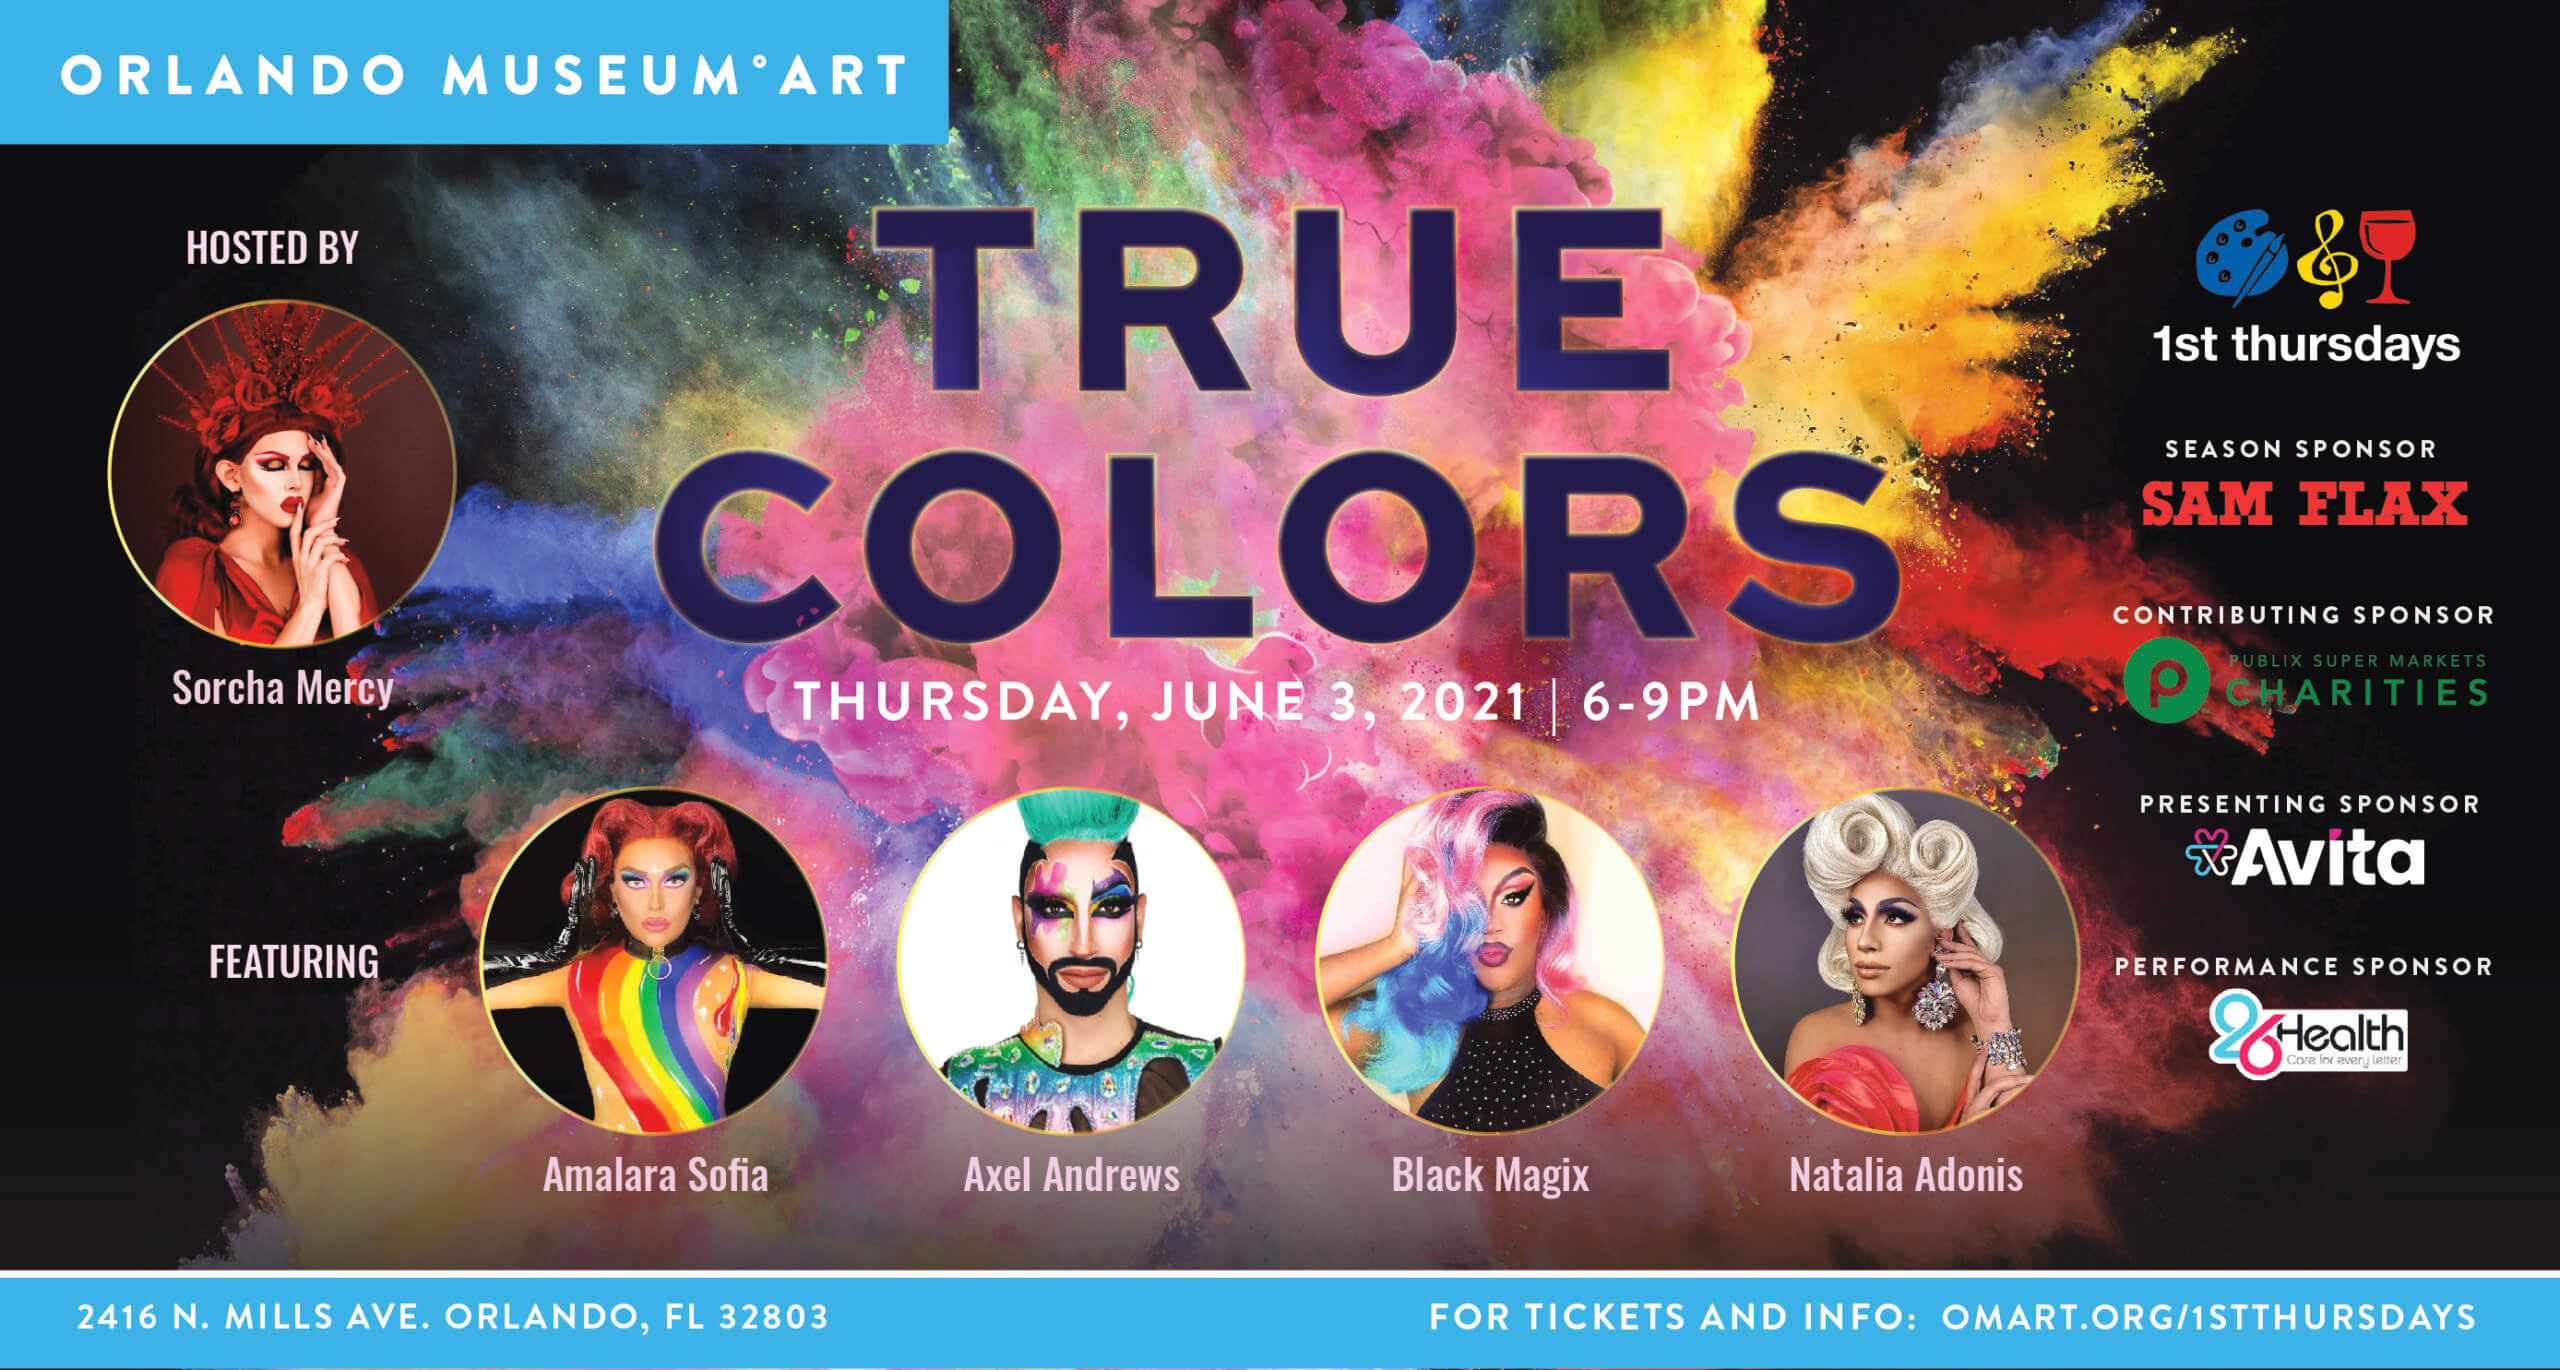 Event flyer for True Colors featuring portraits of performers in colorful clothing and hair